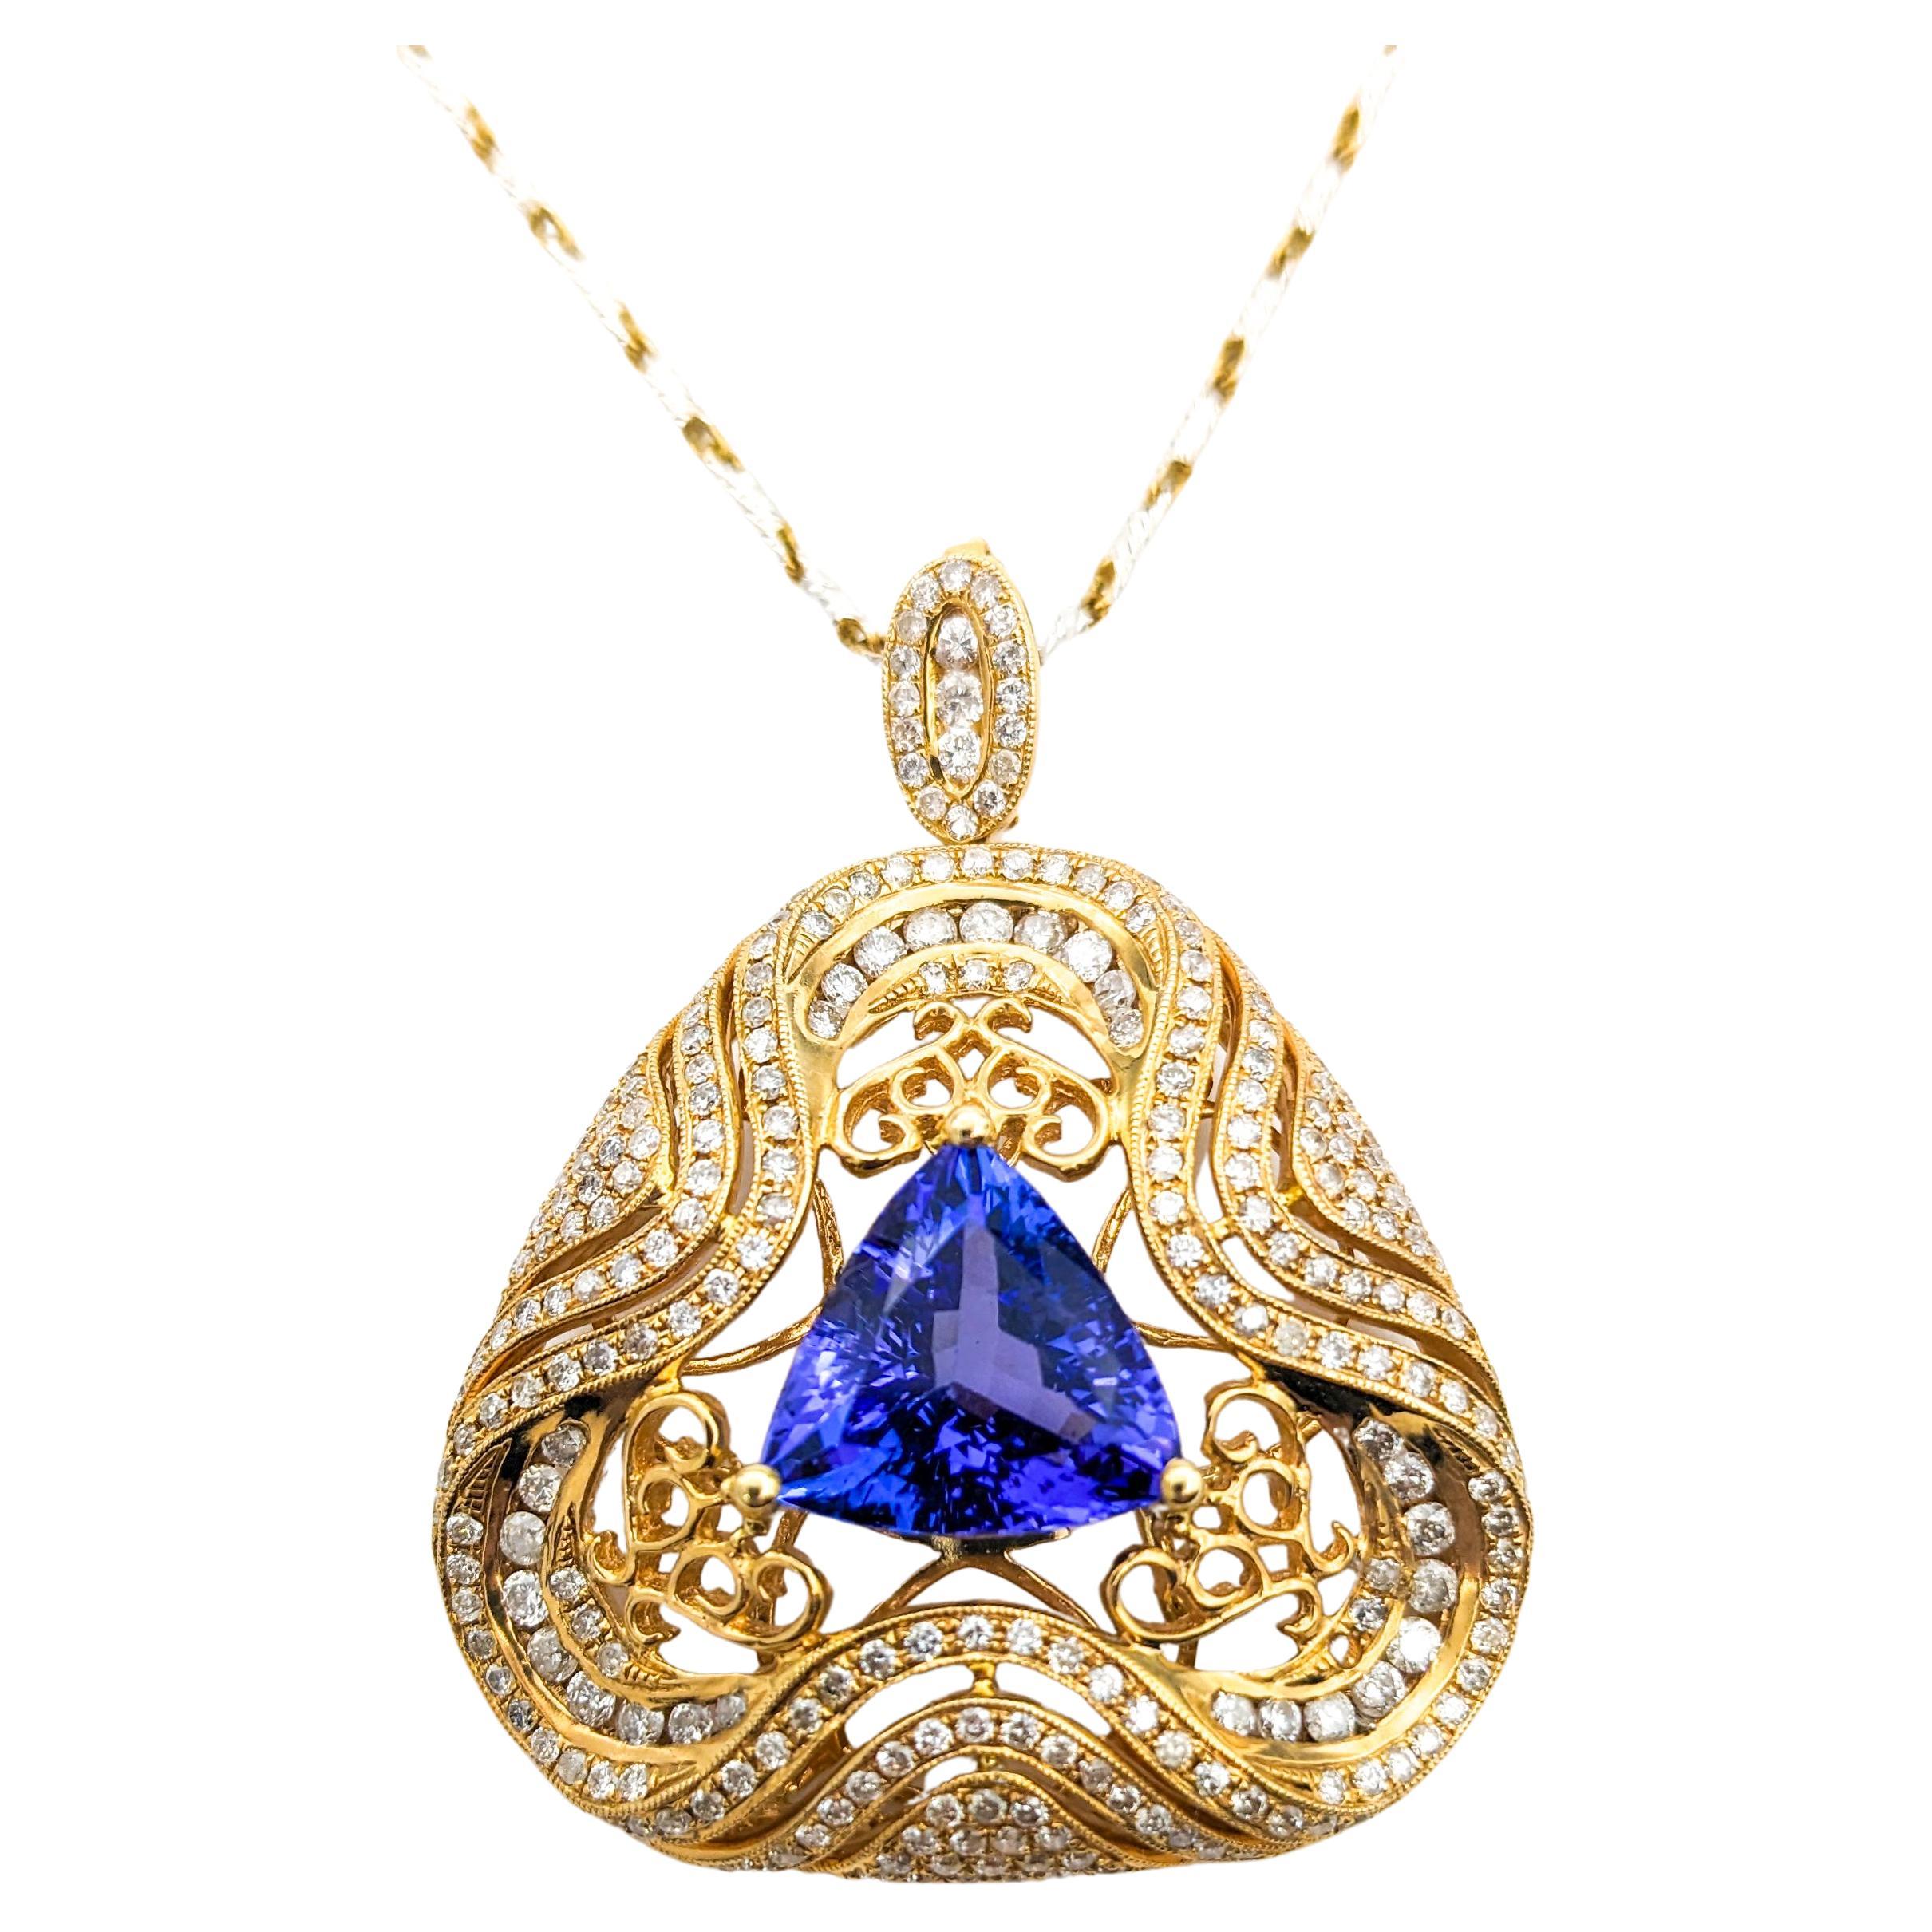 3.87ct Tanzanite & 2.24ctw Diamond Pendant Necklace In Two-Tone Gold

Introducing this exquisite 3.87ct Tanzanite Necklace crafted in 14K Two-Tone Gold, a perfect blend of elegance and modern design. The Trillion Cut Tanzanite is gorgeous with its